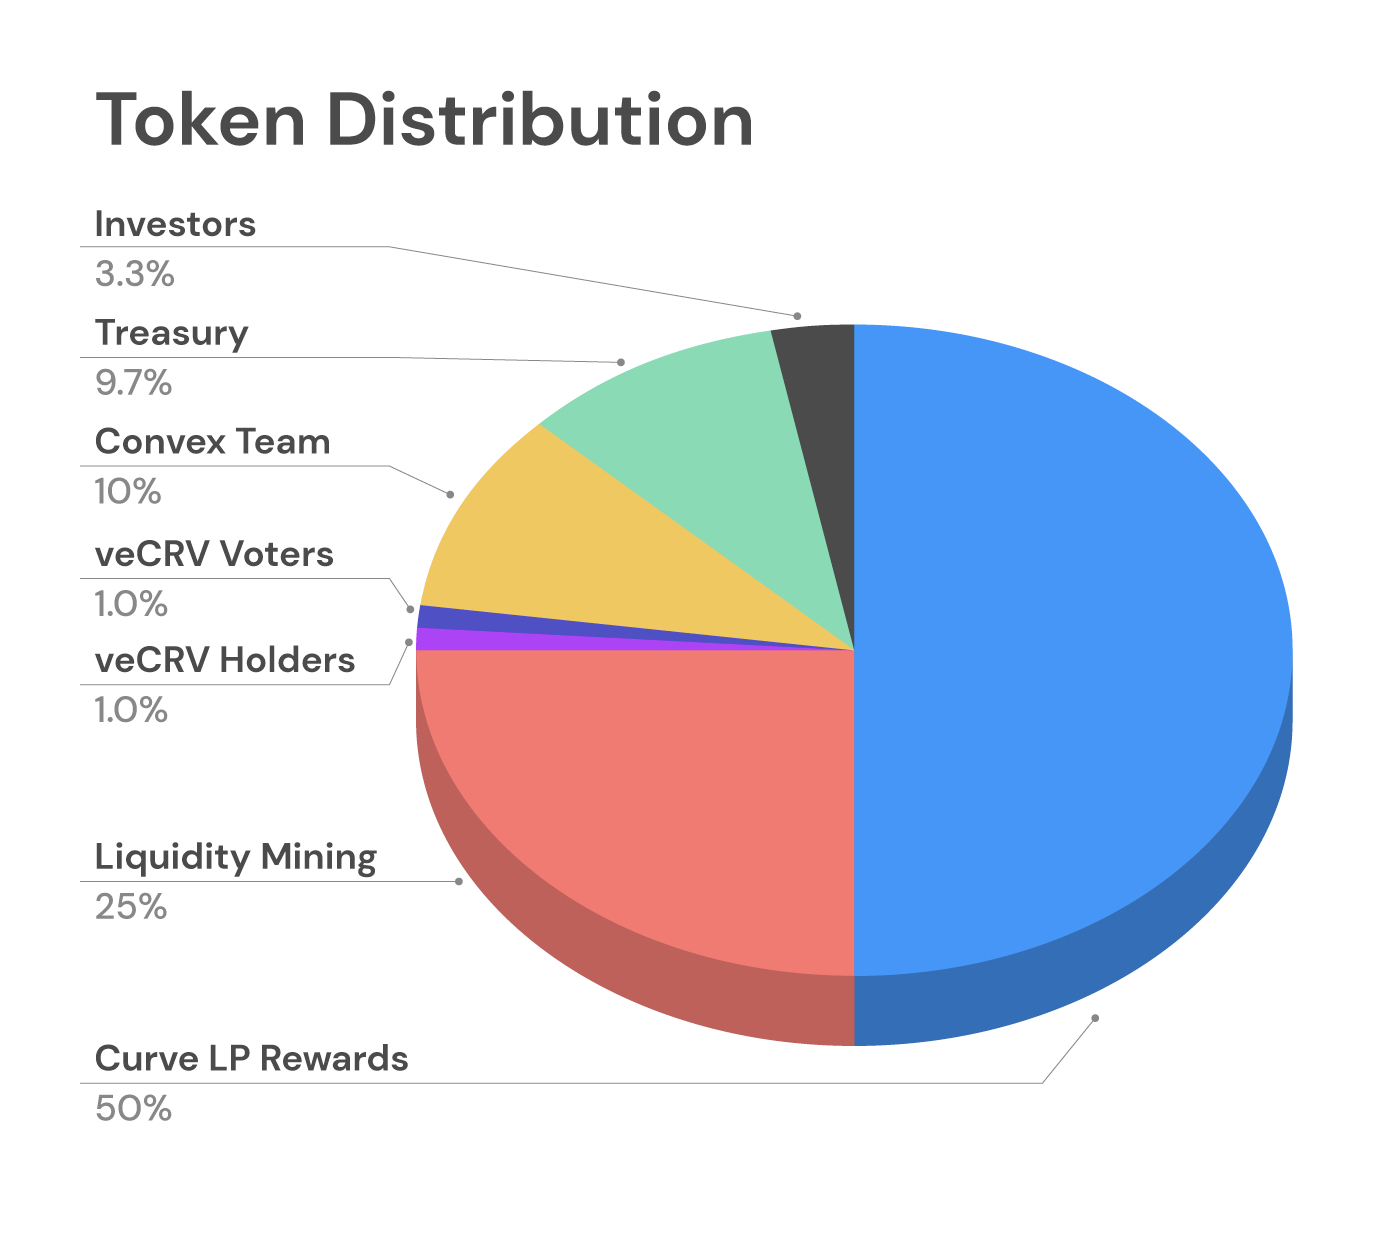 Token Distribution example by Zelta